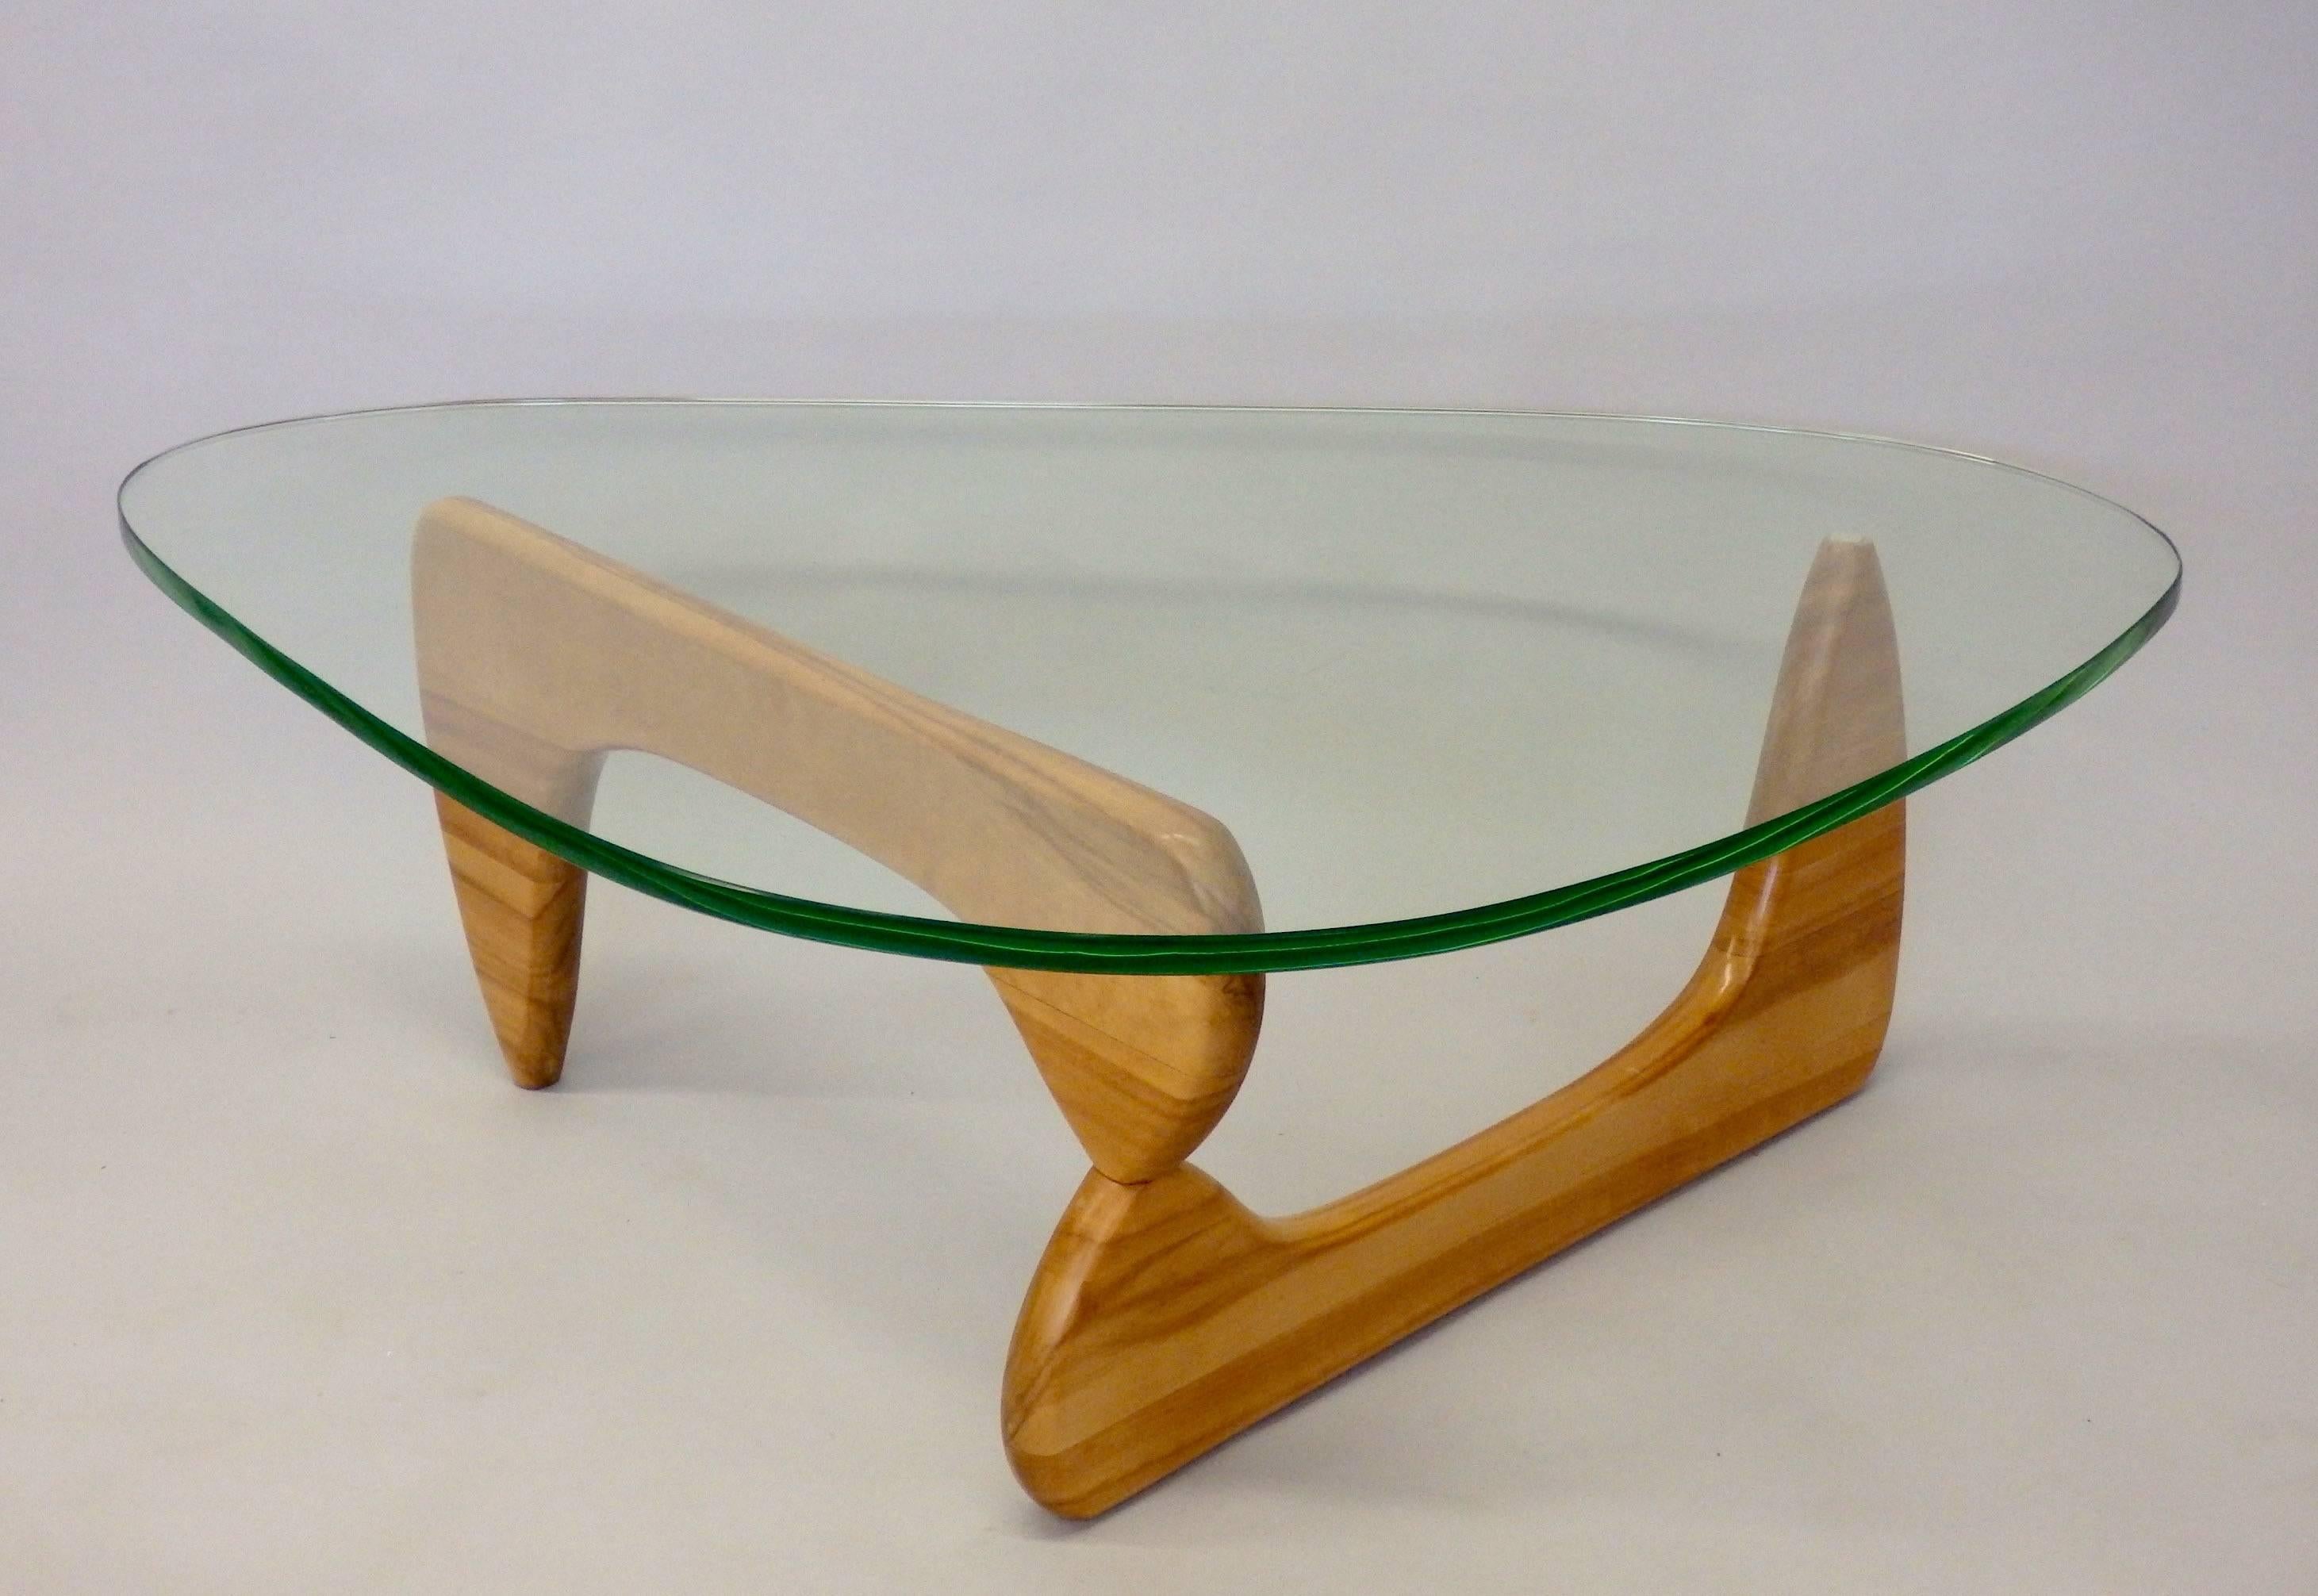 Finest example of early production Noguchi for Herman Miller coffee or cocktail table. Original light green edge glass top in fine condition. Birch base has been refinished.